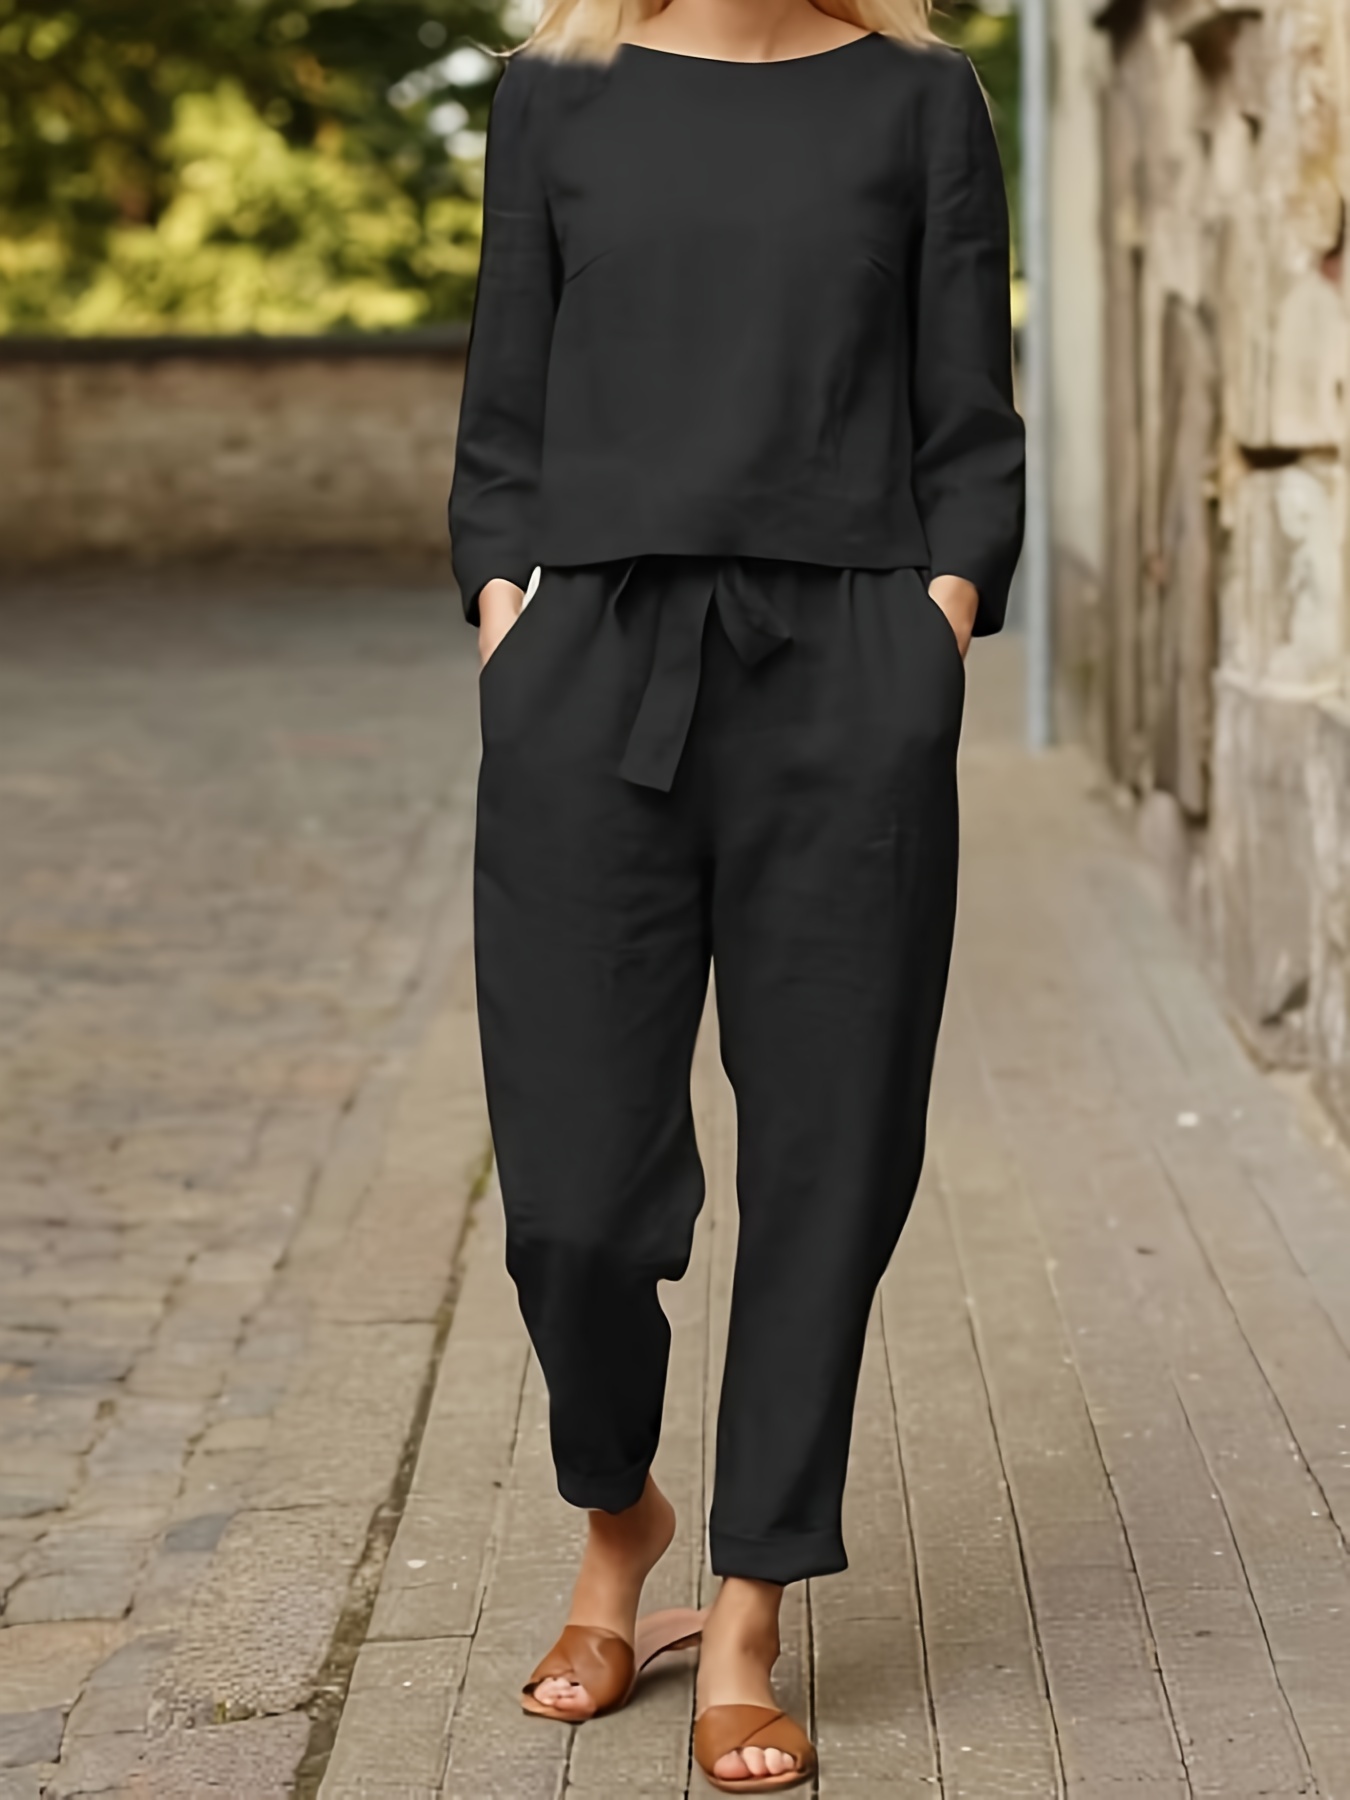 Fall new women's black two-piece suit loose large size blouse tooling casual  pants